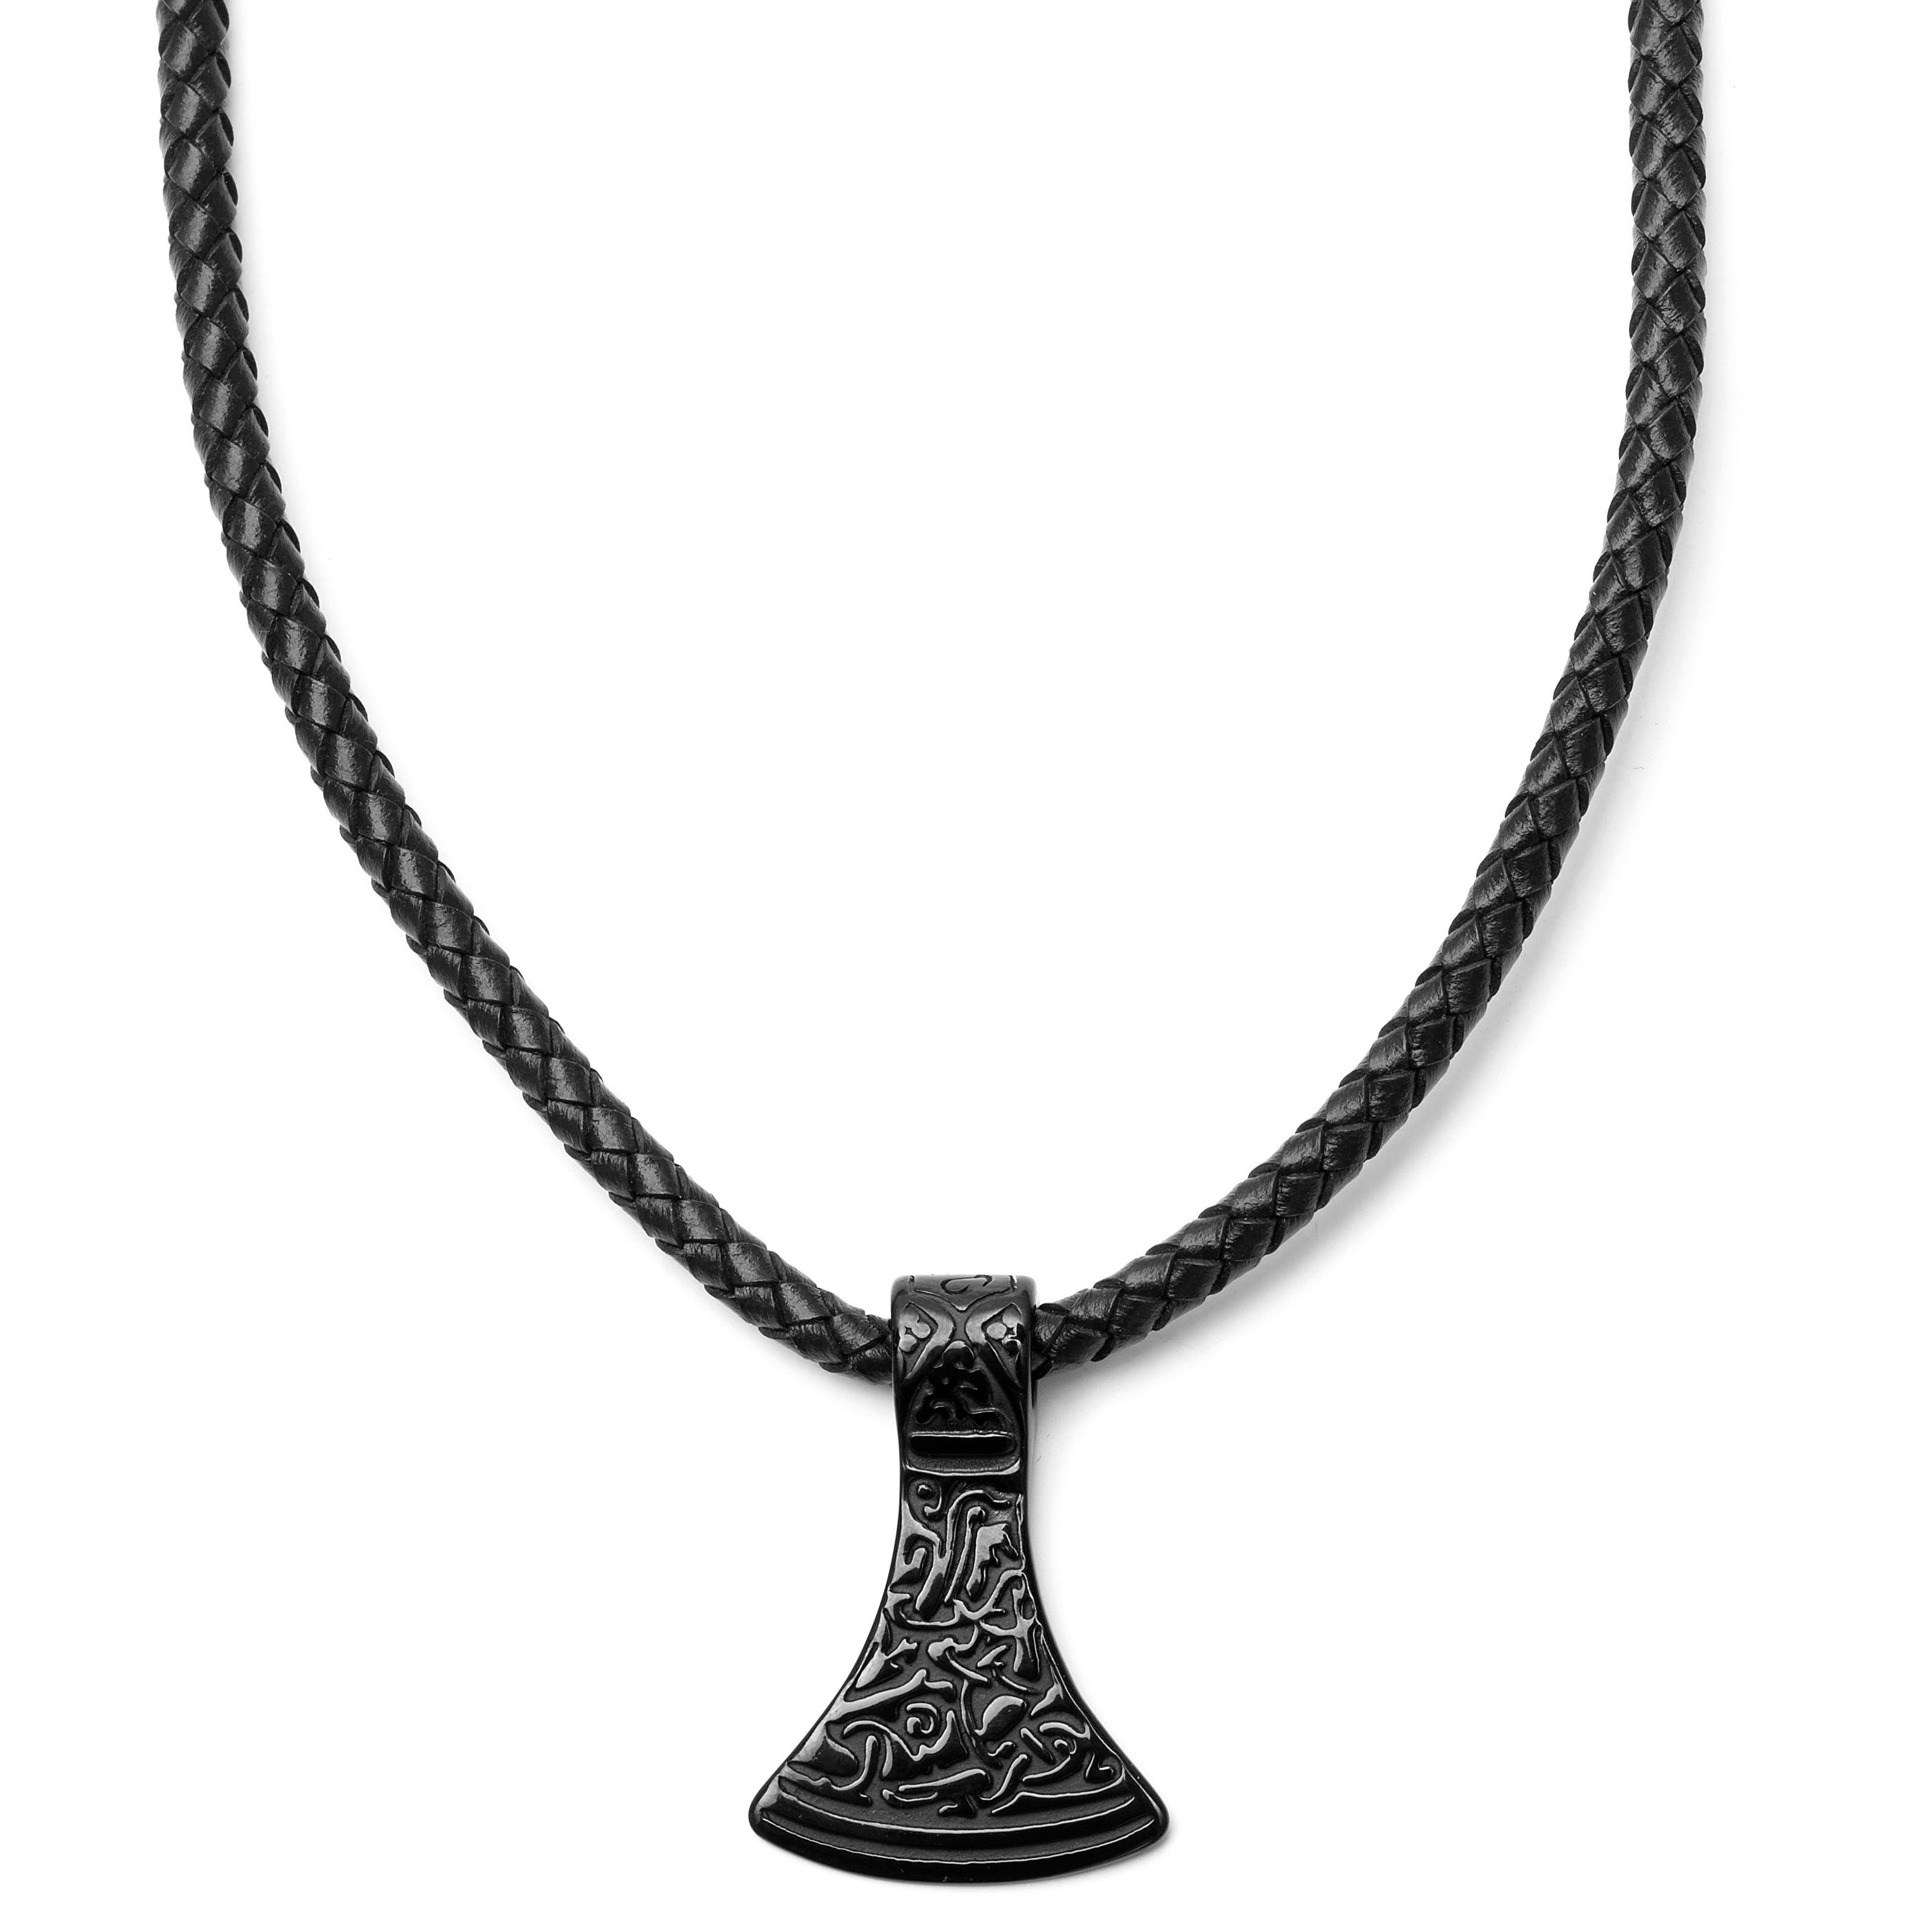 Rune Thor’s Axe Black Leather Necklace